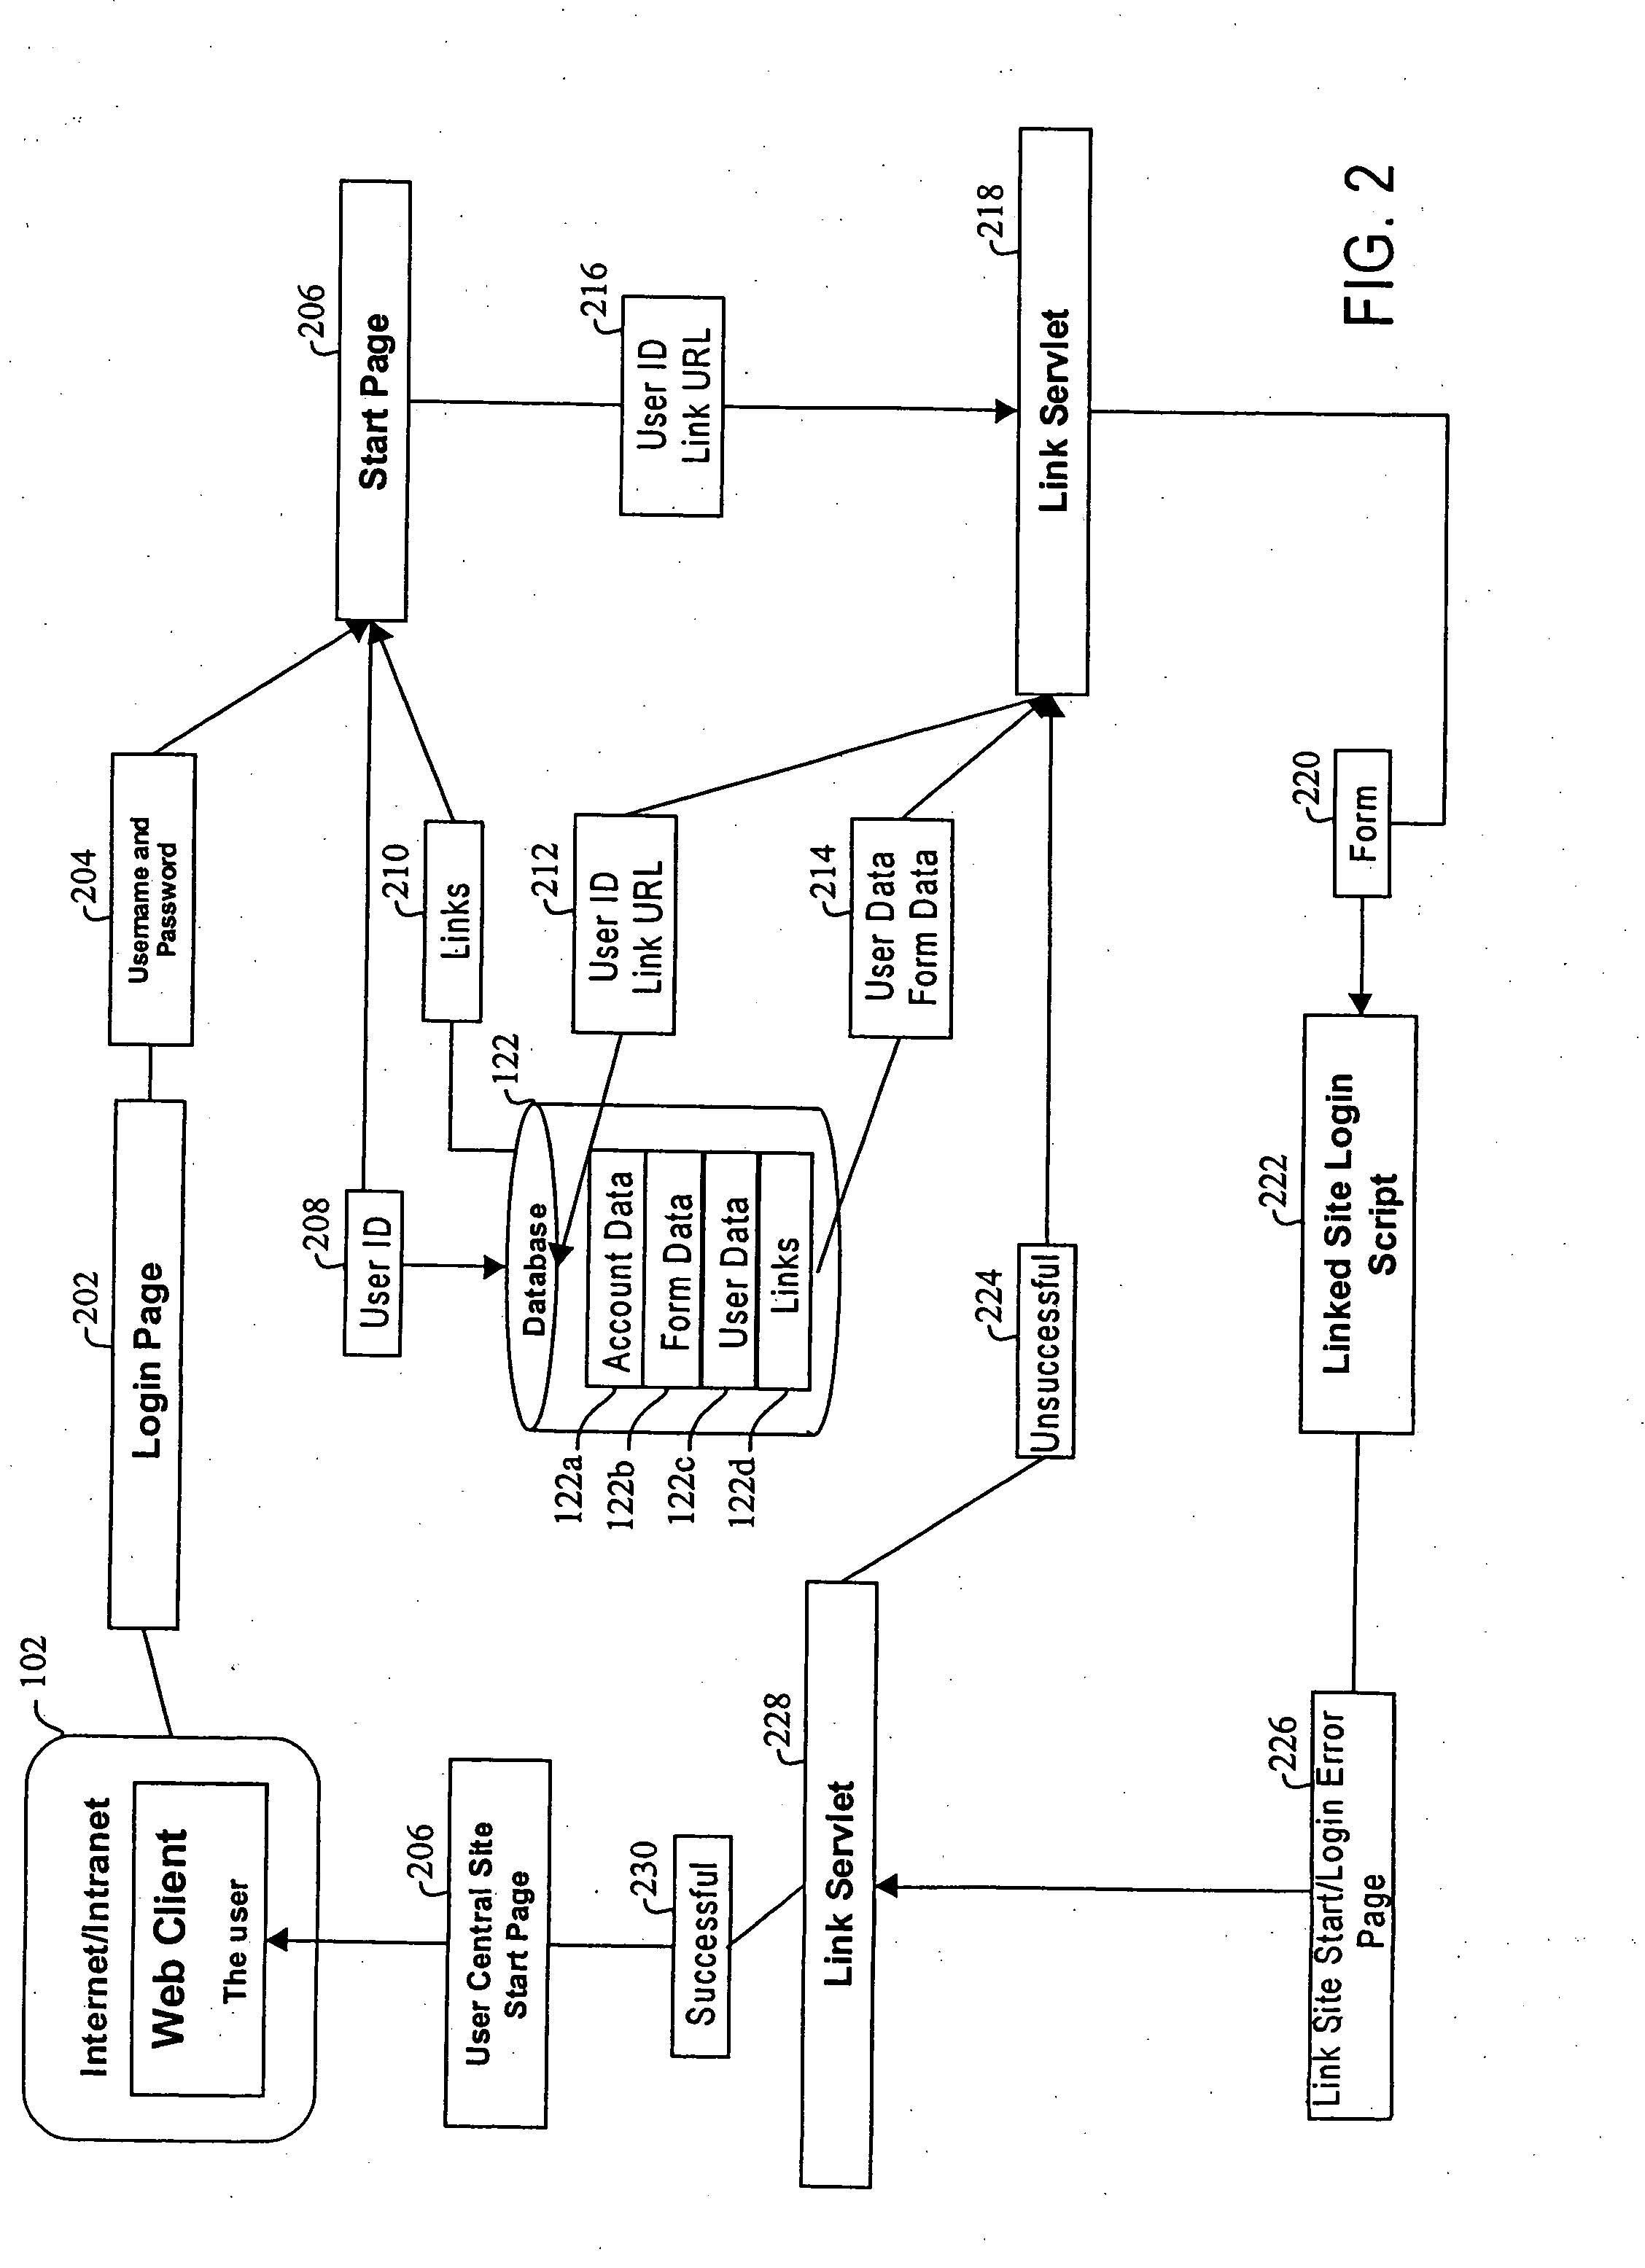 Method, system and computer readable medium for Web site account and e-commerce management from a central location